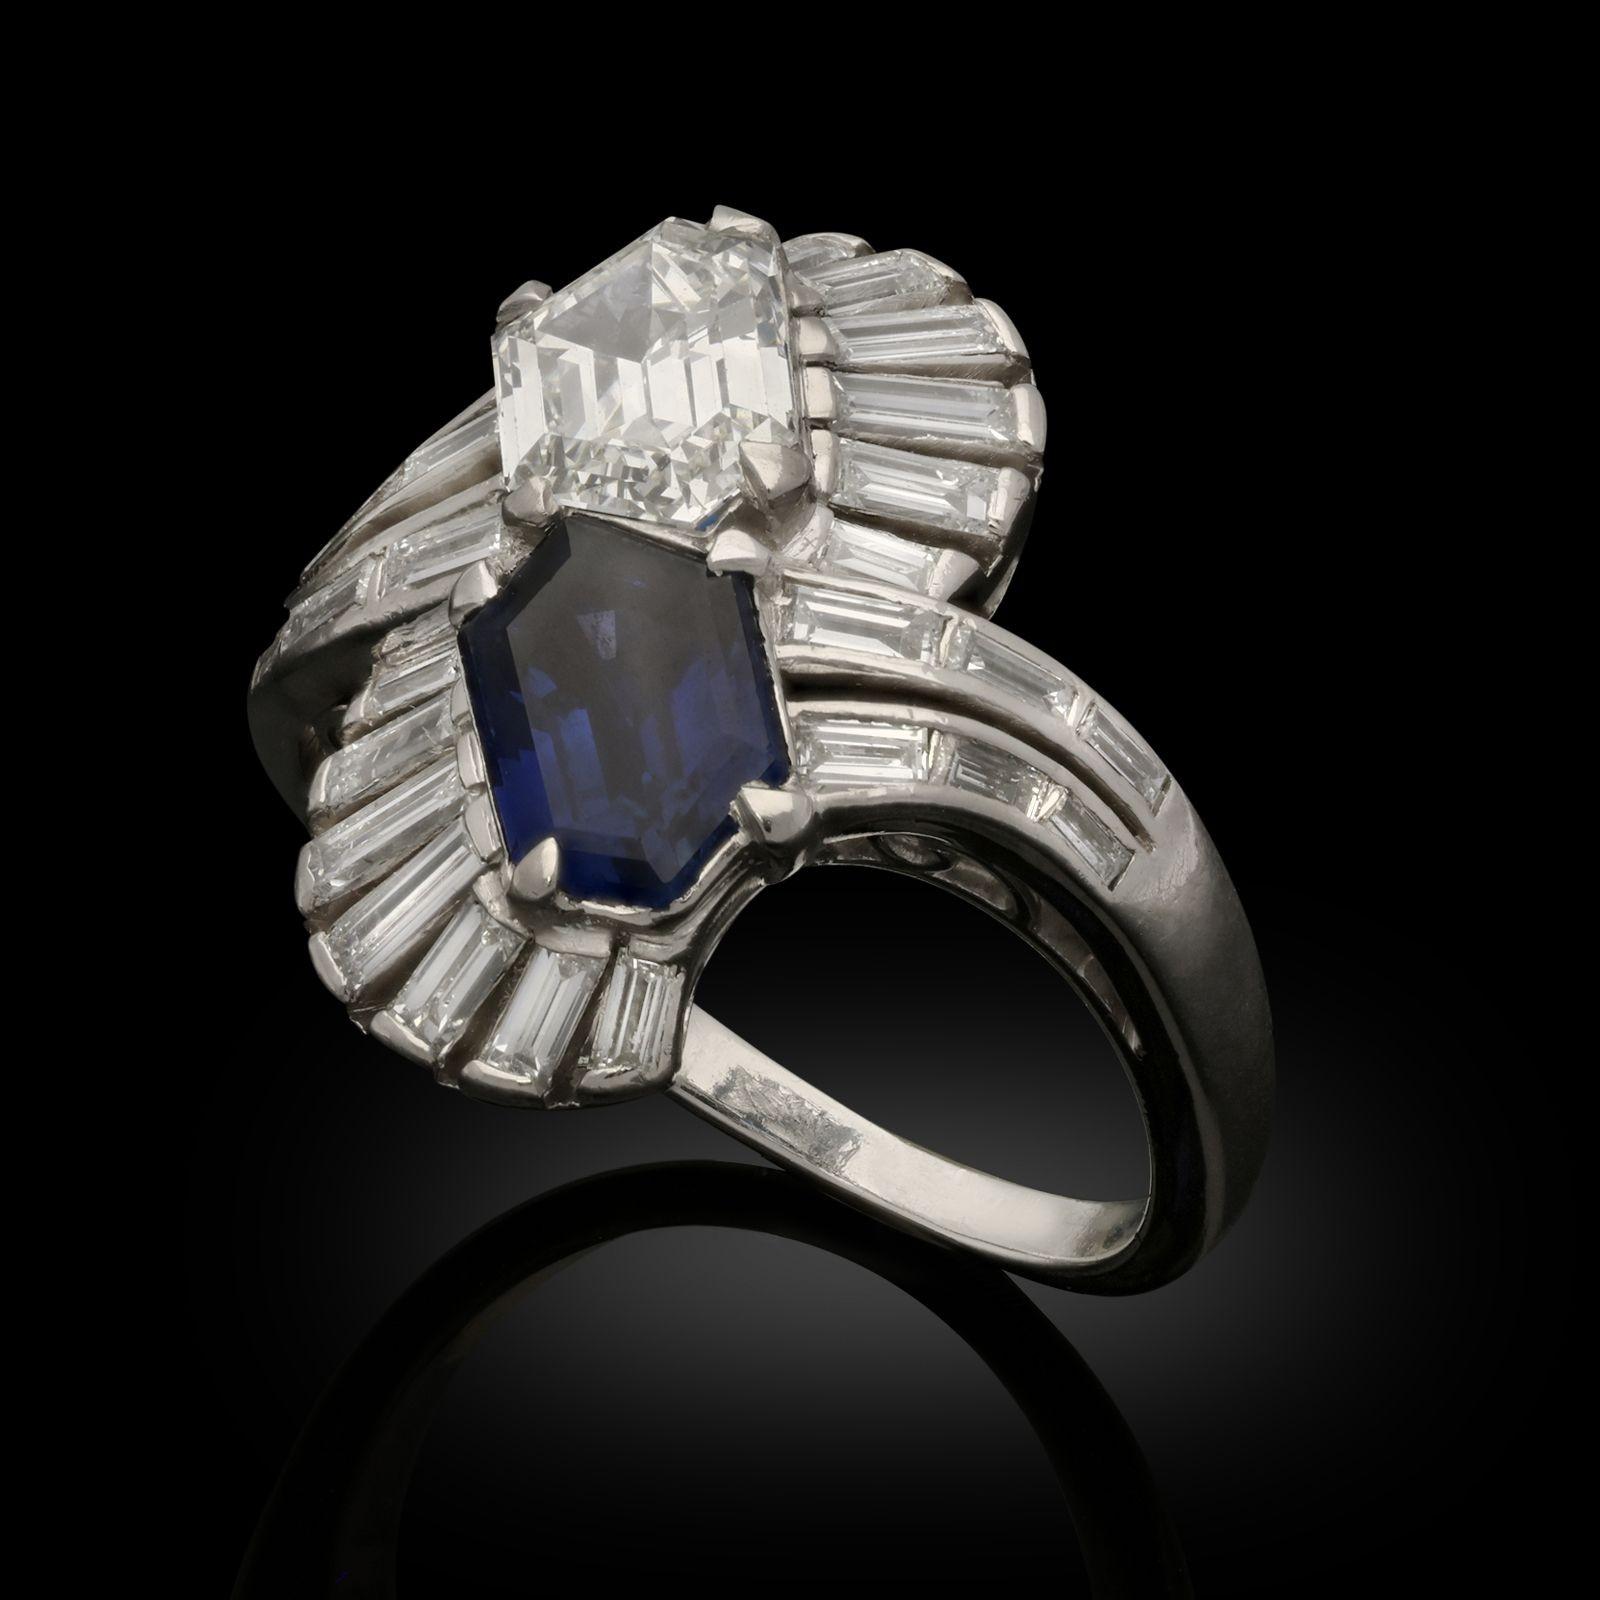 A beautiful Art Deco sapphire and diamond ring c.1930 designed as two stylised peacock feathers in a vertical cross over design, the ‘eyes’ of each feather formed of either a hexagonal step cut sapphire or diamond, above each is a fan shape of